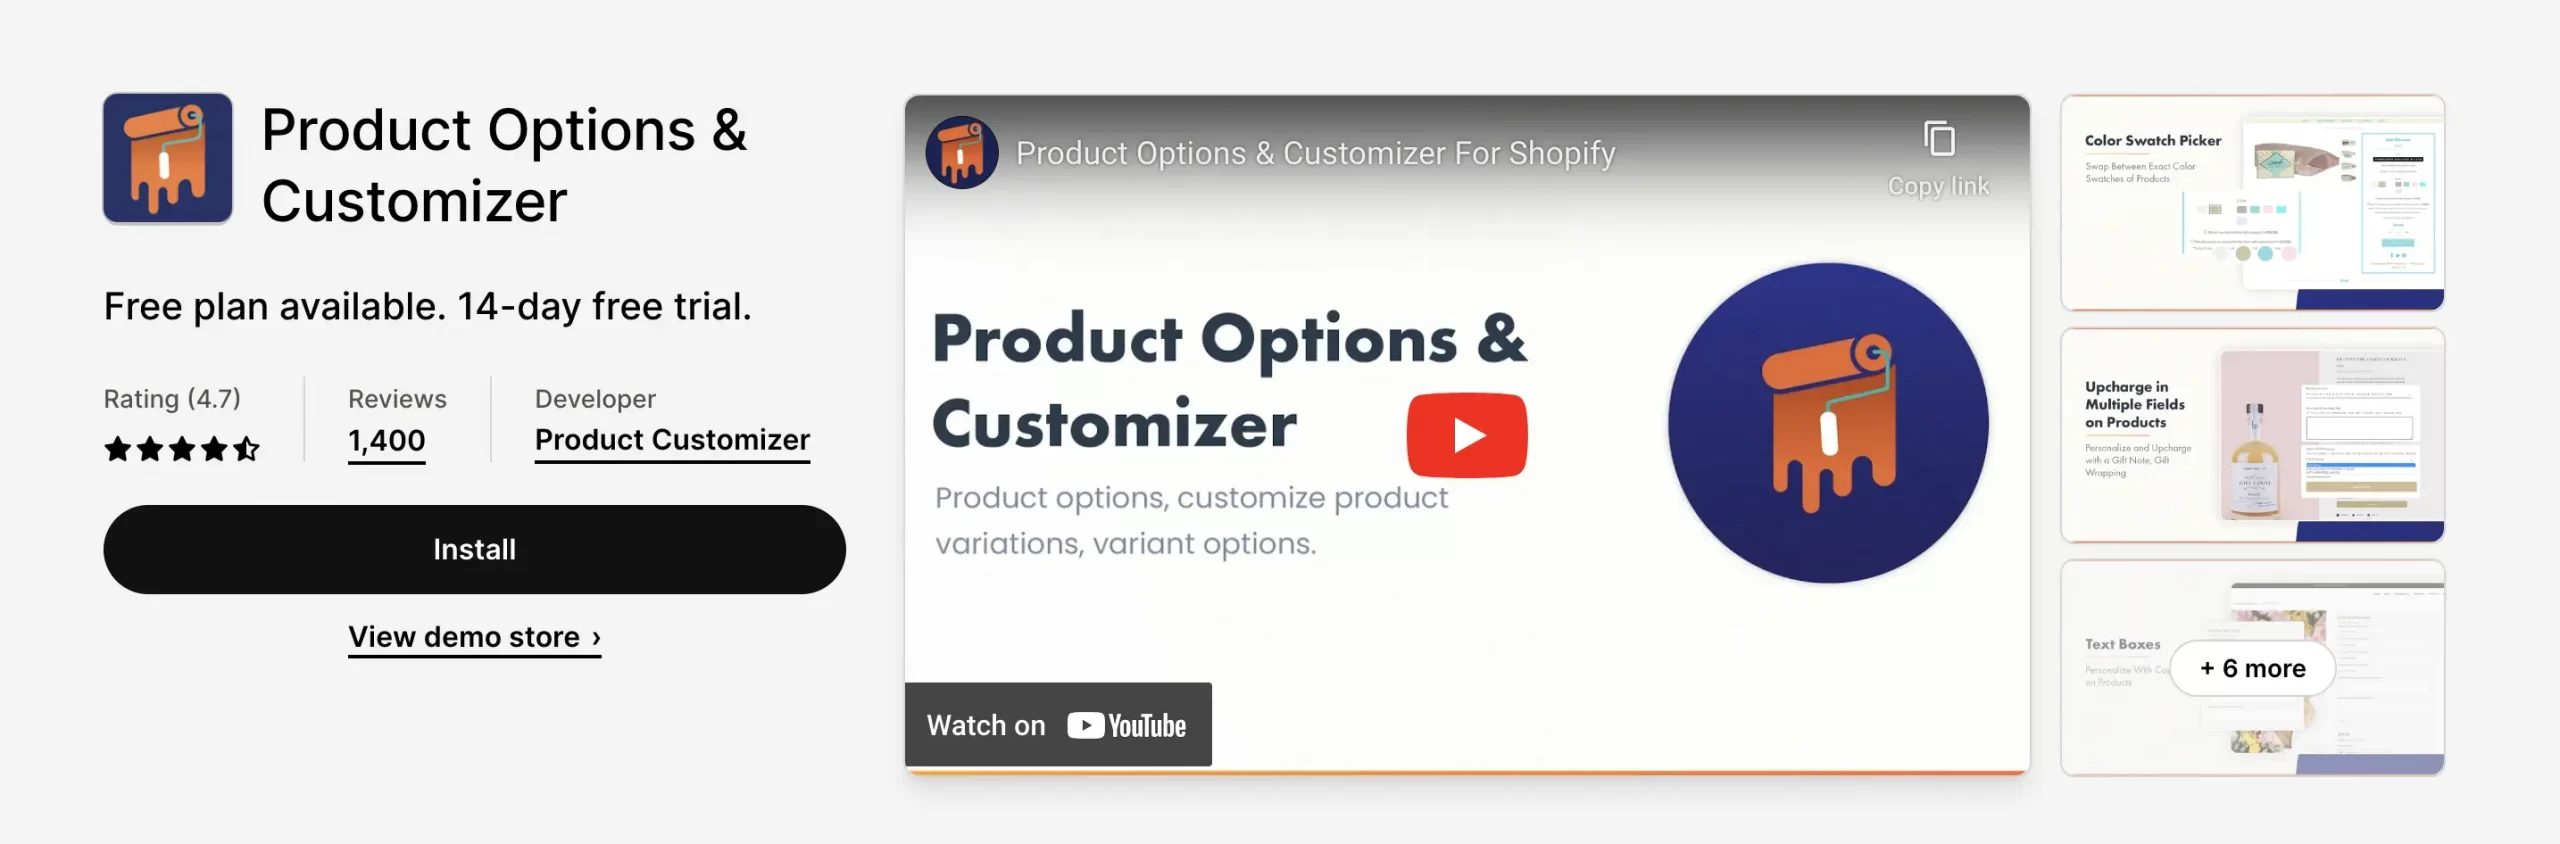 Product Options & Customizer app allows you to customize product variants.